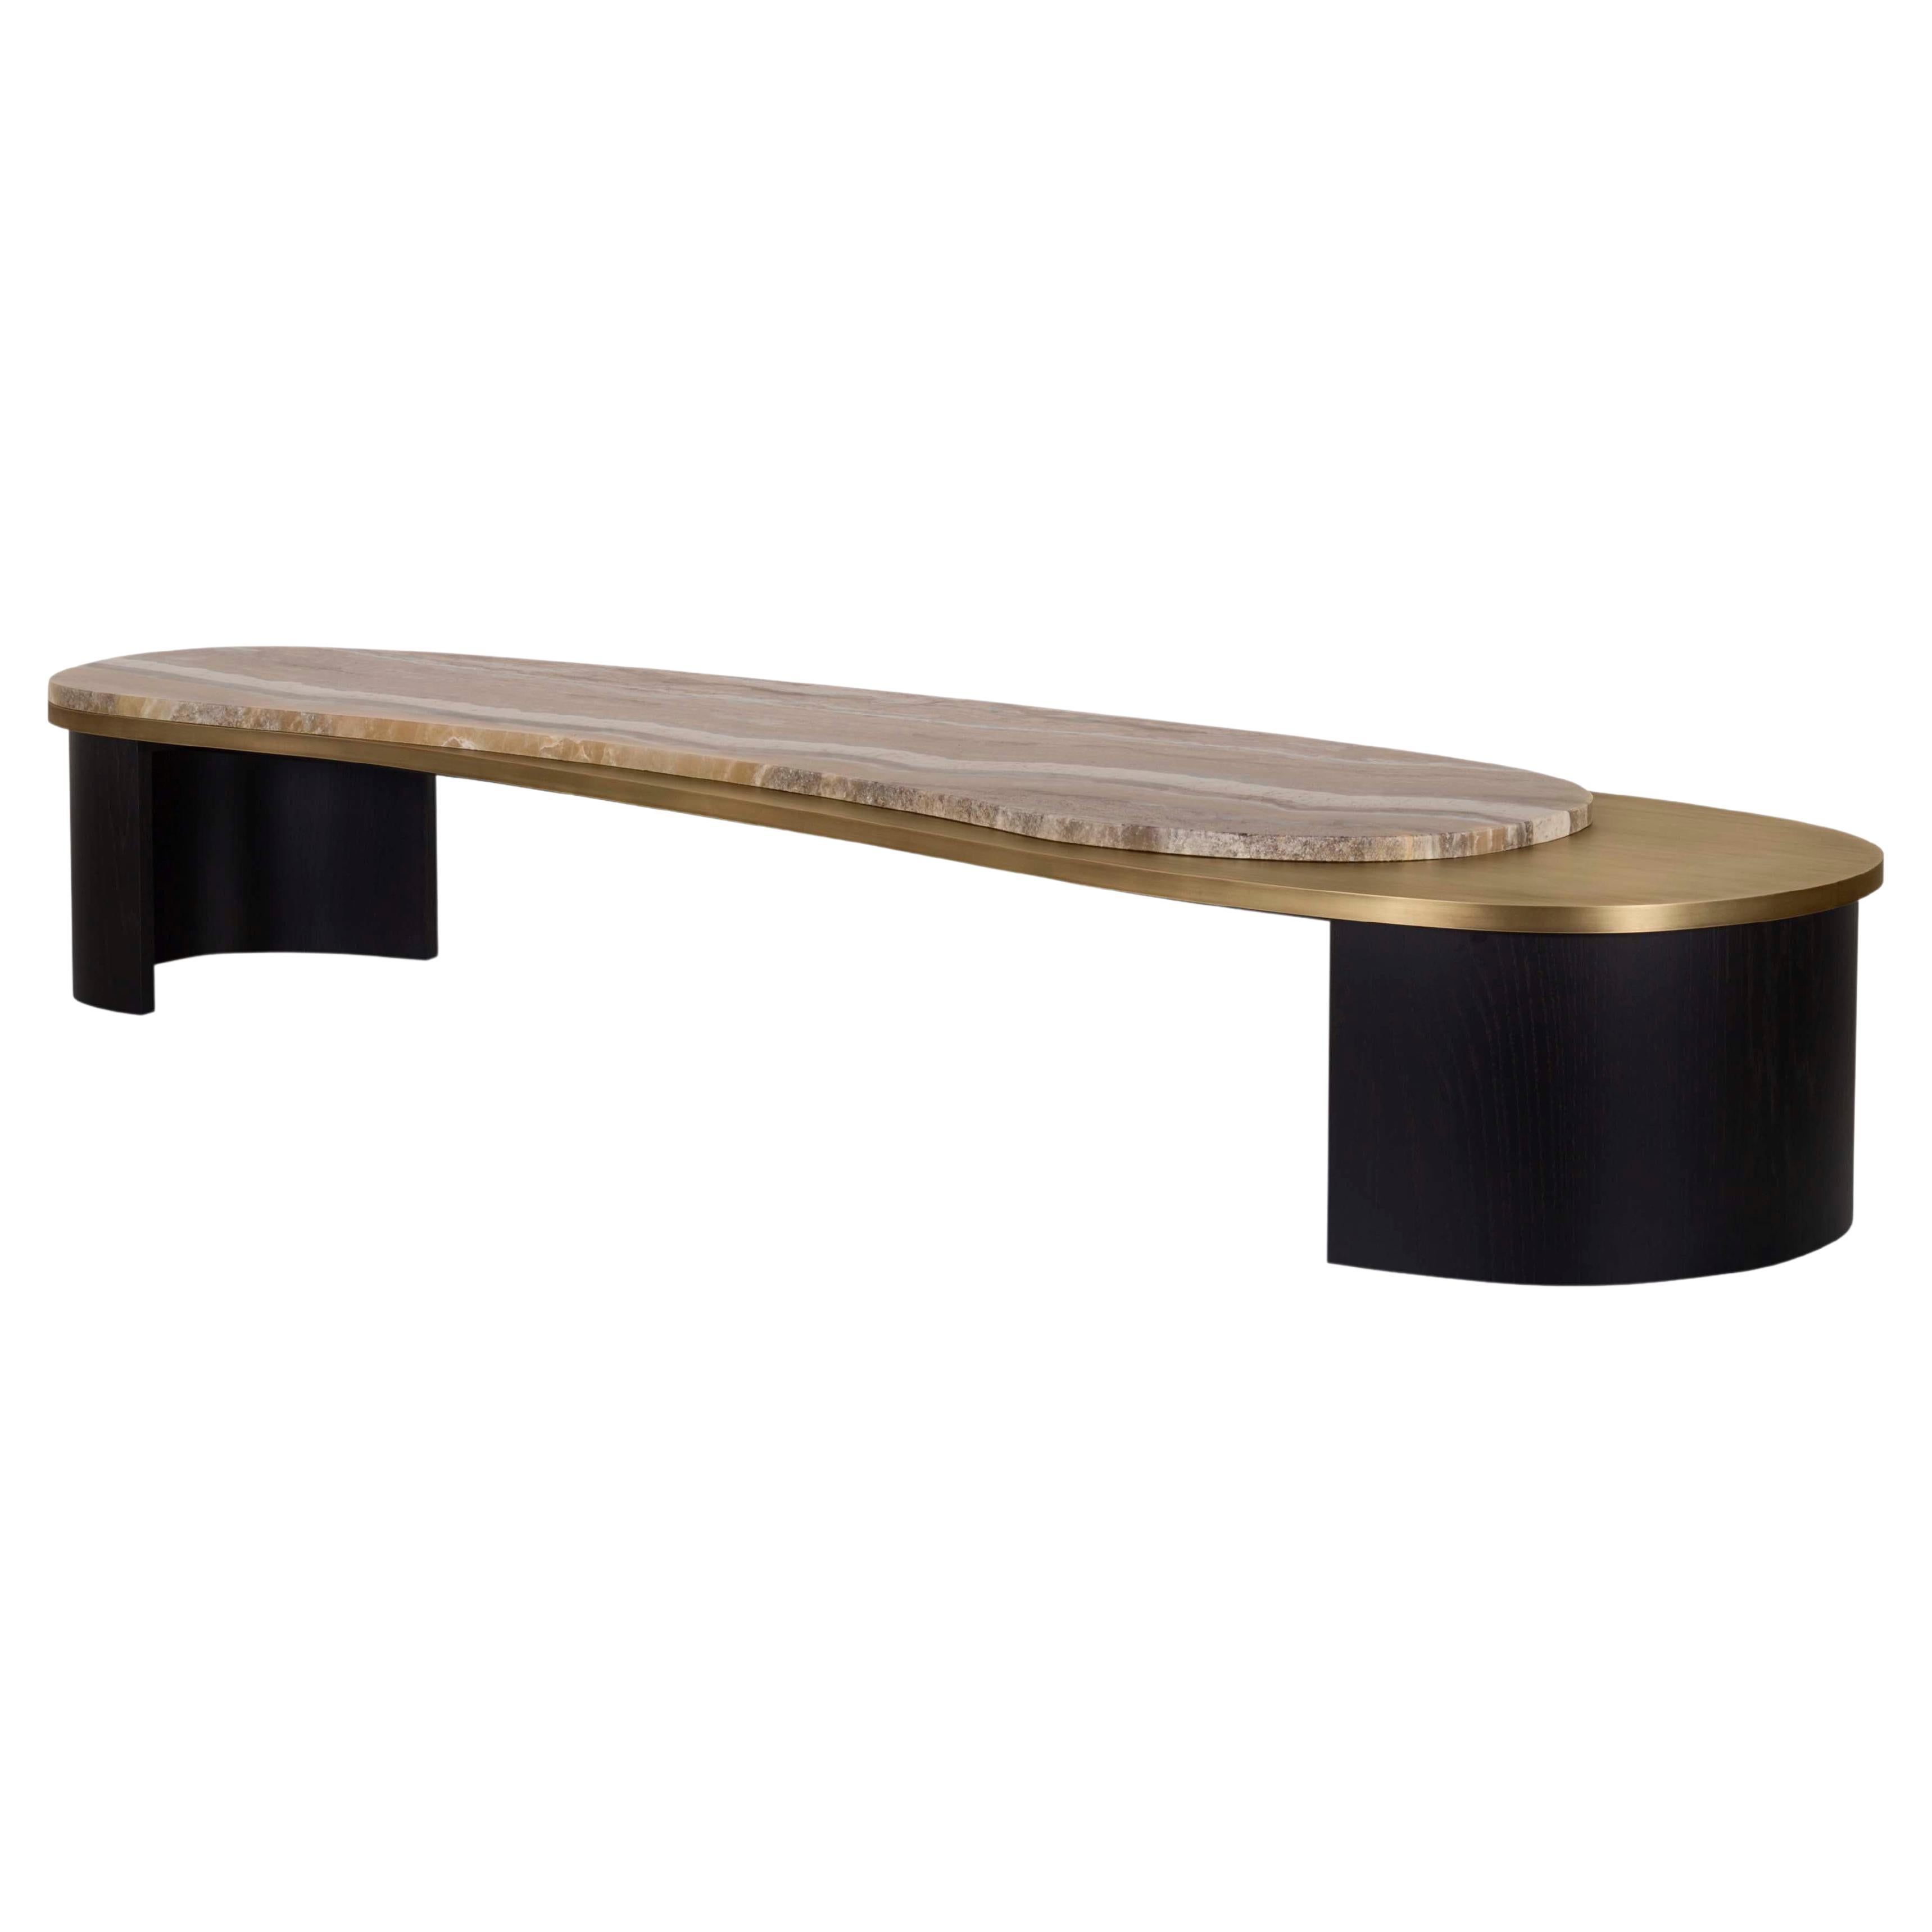 21st Century Modern Armona Coffee Table Handcrafted in Portugal by Greenapple